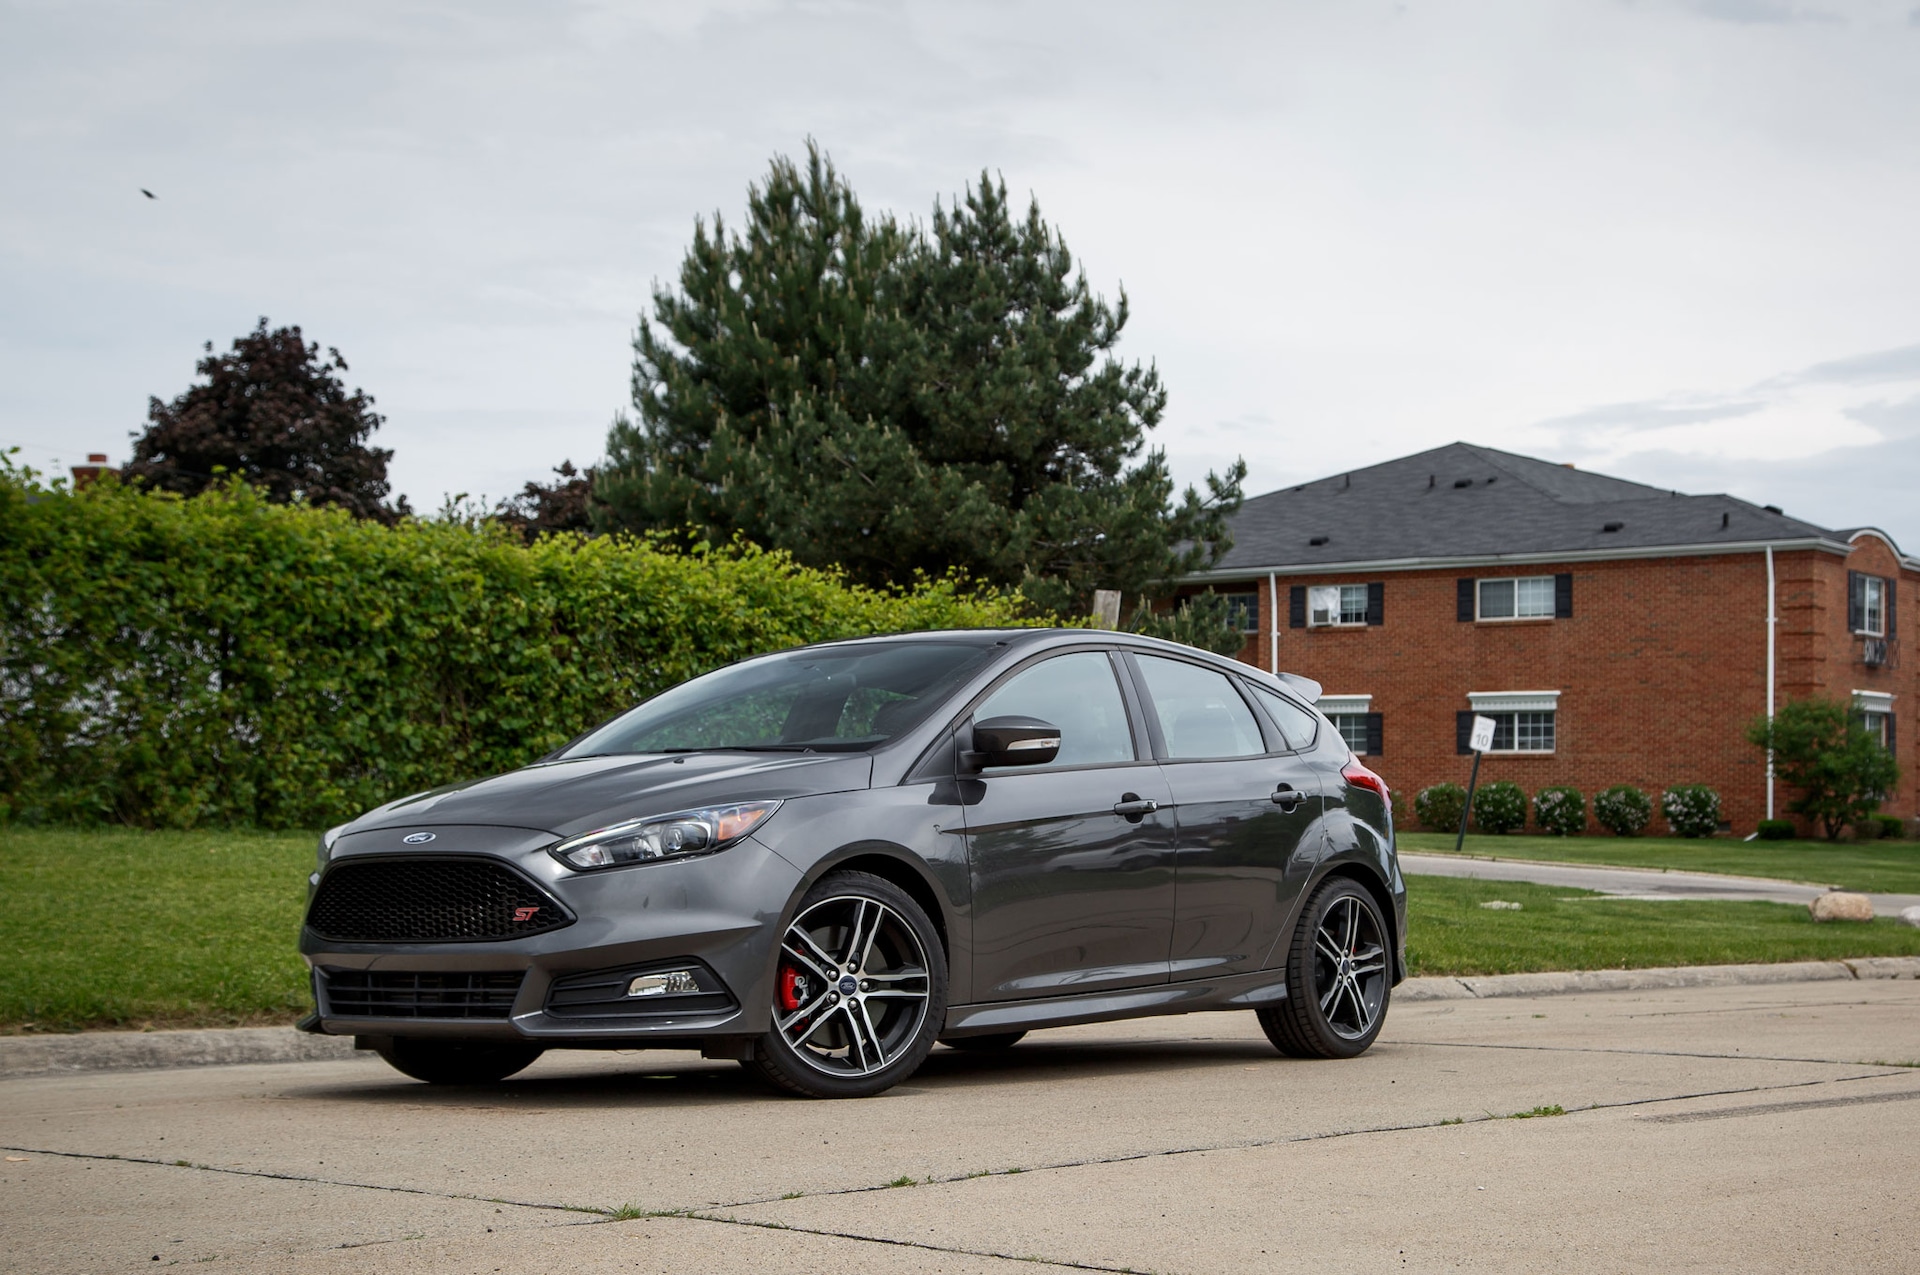 2015 Ford Focus ST Review